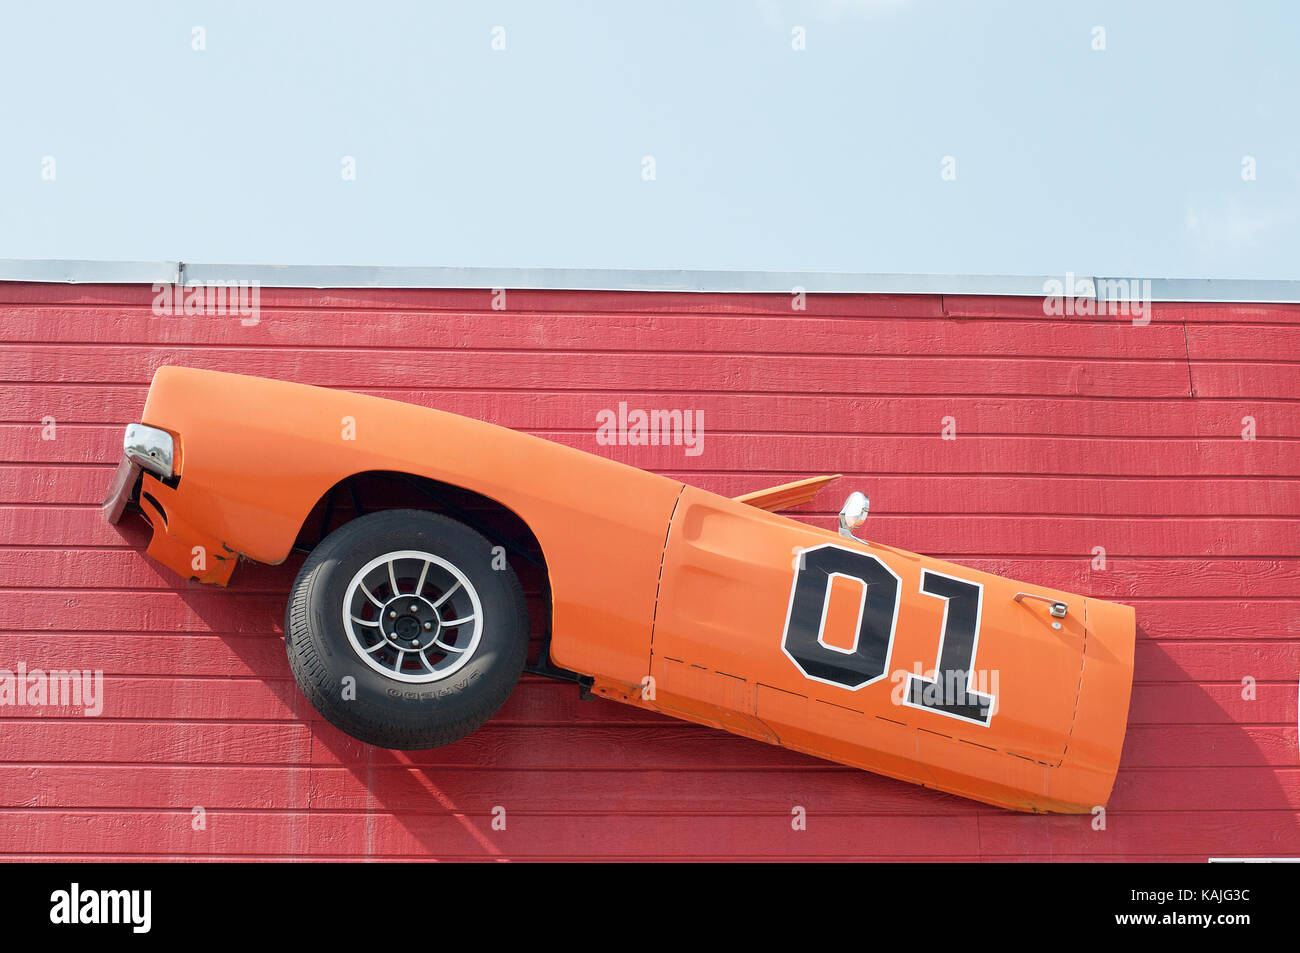 The General Lee car based on The Dukes of Hazzard TV show Stock Photo -  Alamy